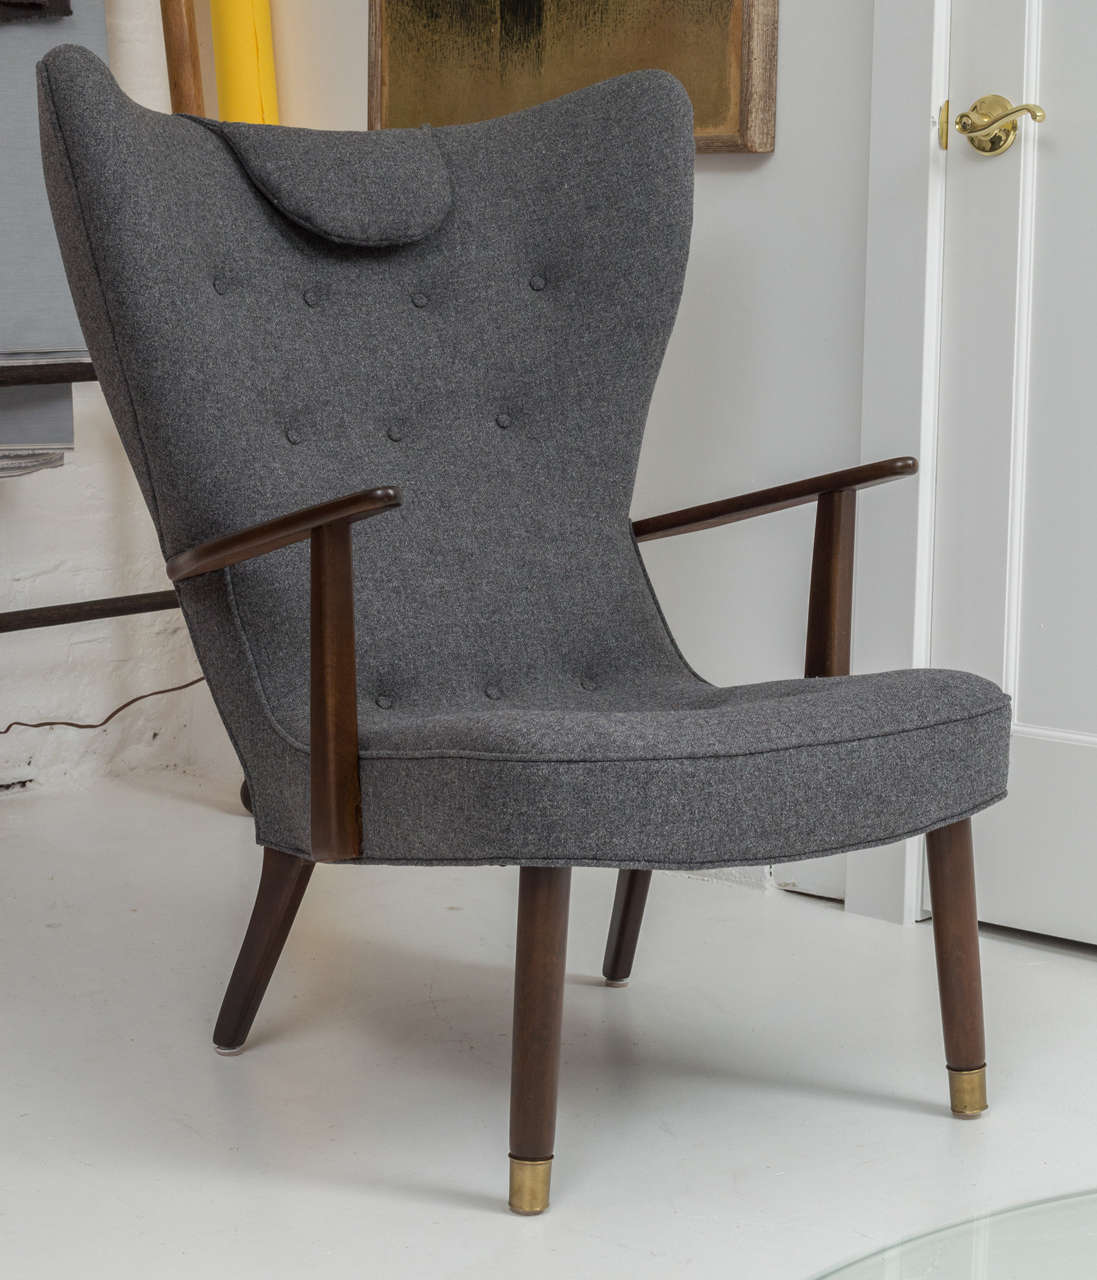 Beautiful vintage wing chair. Completely refurbished with new Maharam wool upholstery and refinished frame. Brass feet caps and padded head rest.